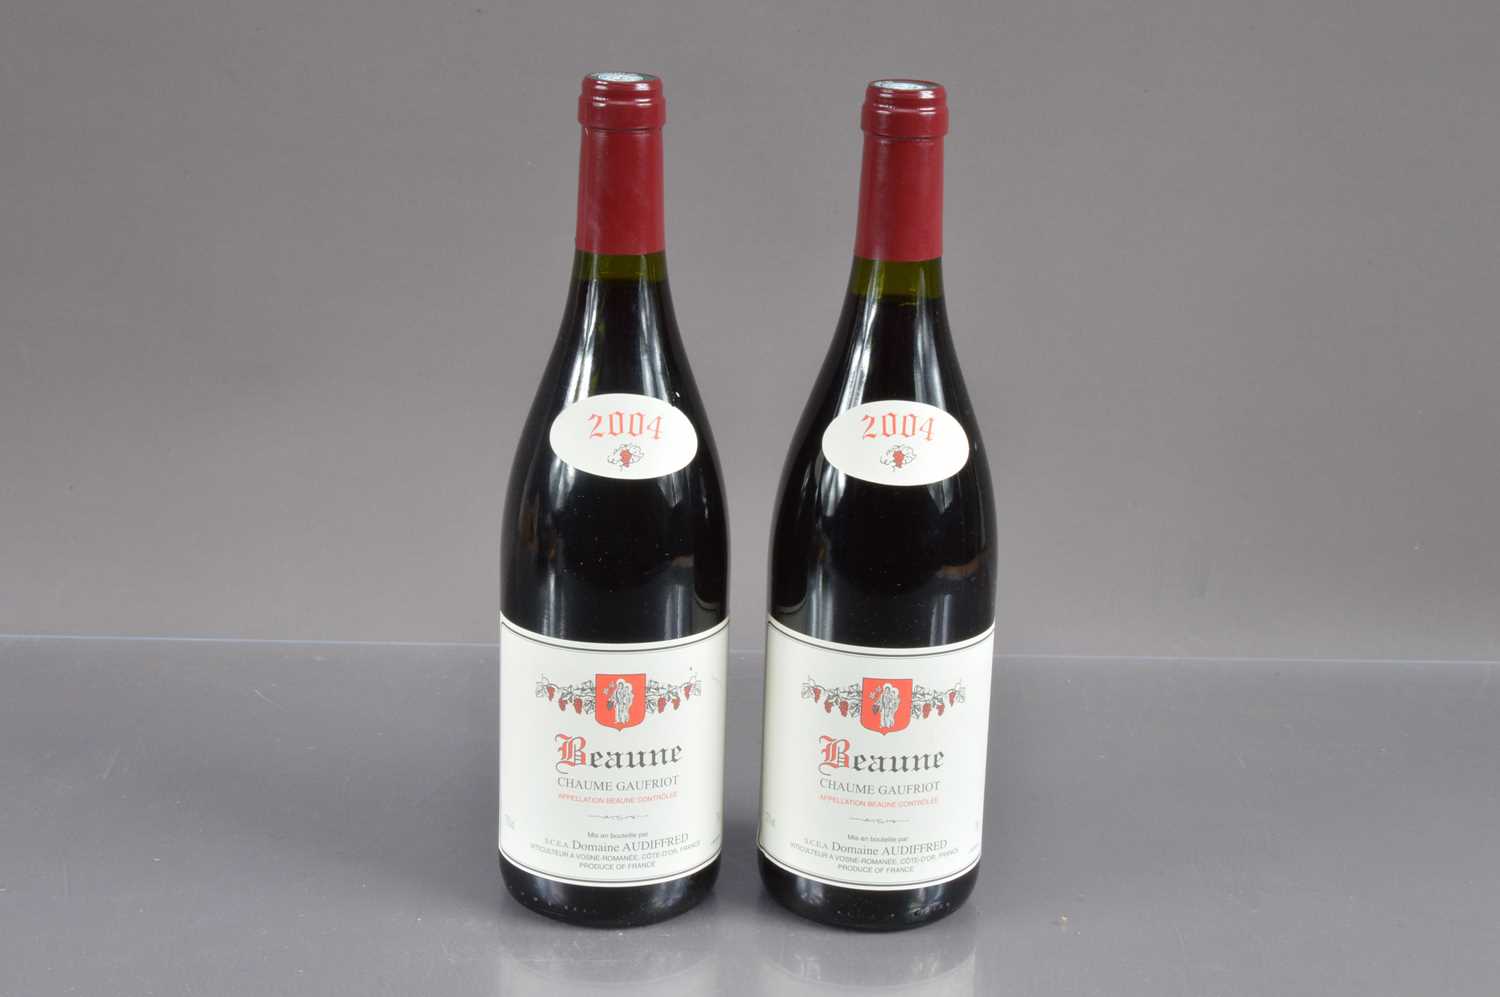 Two bottles of Beaune Chaume Gaufriot 2004,